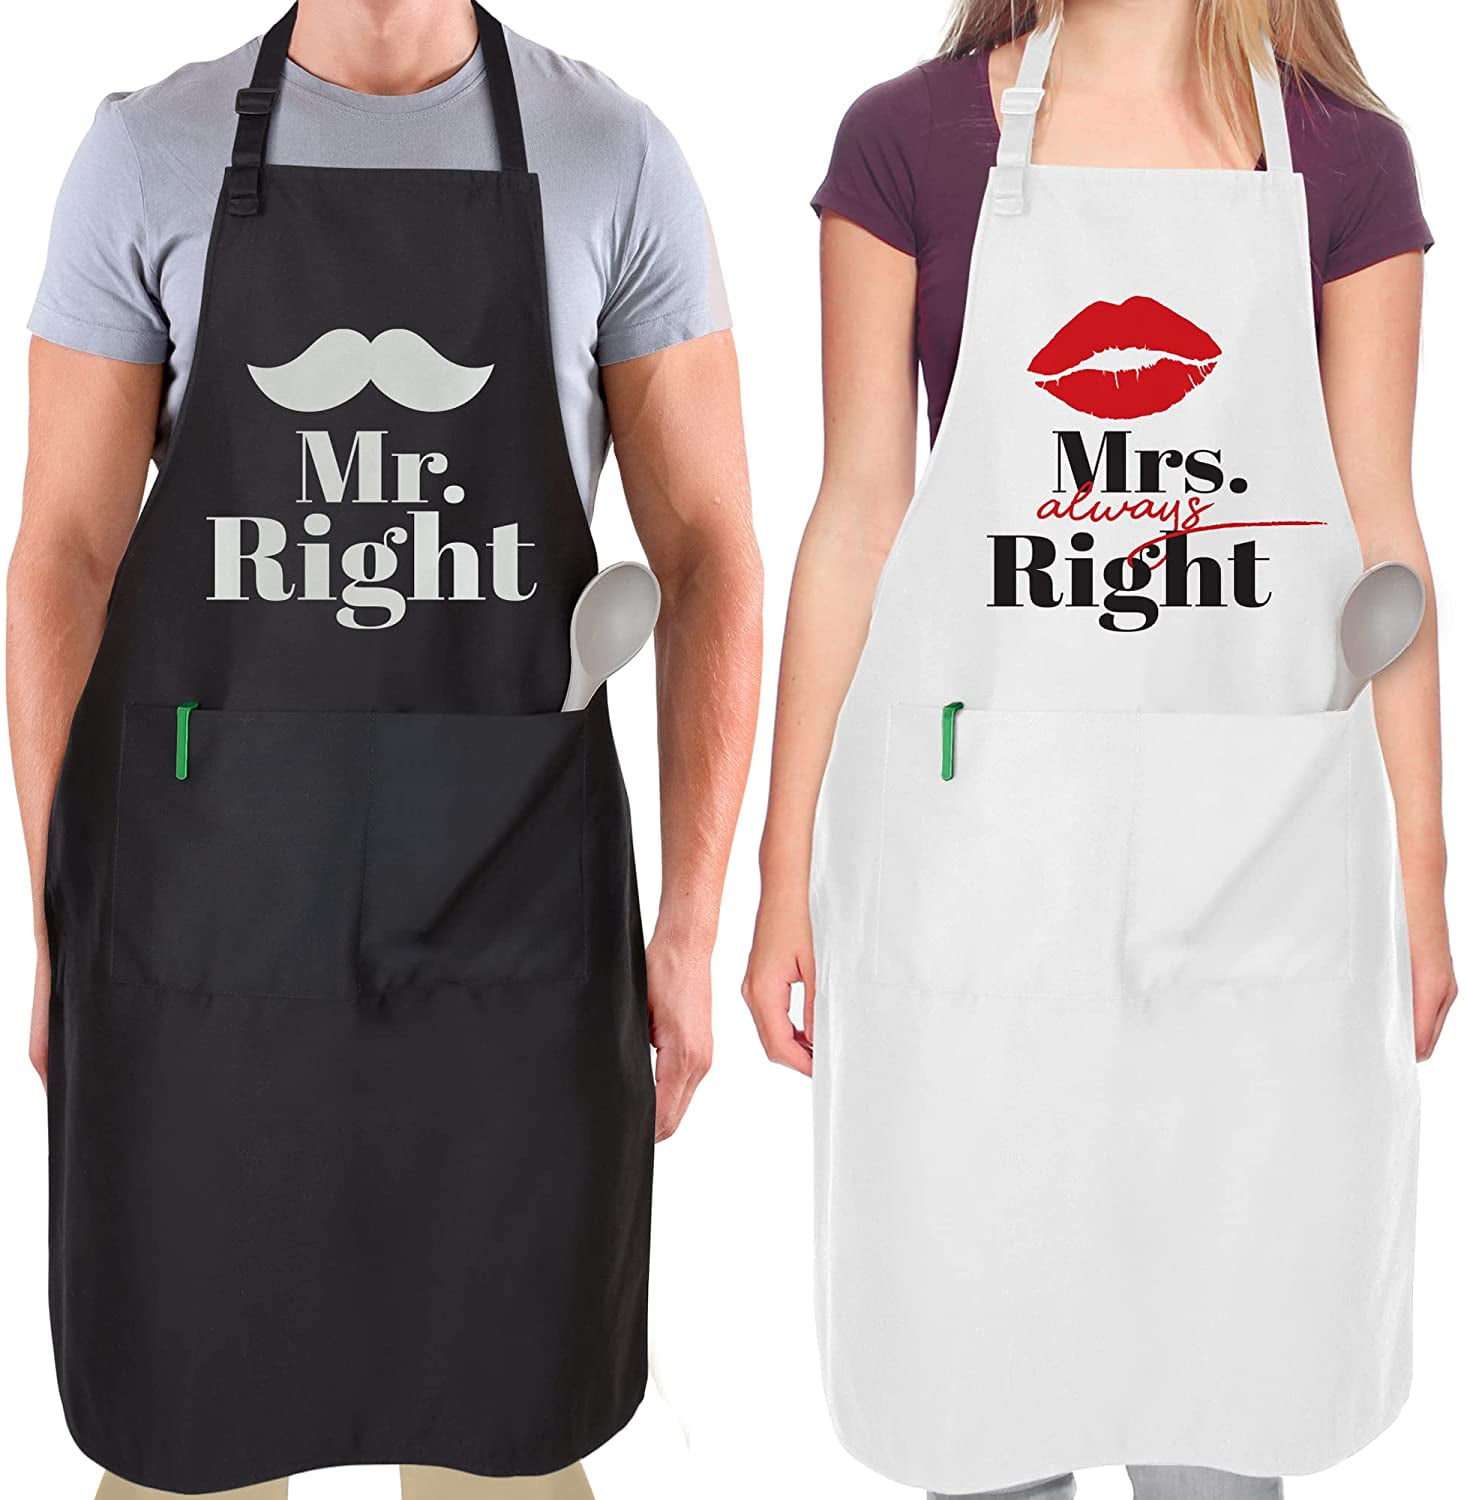 Funny Kitchen Aprons, Chef Gifts, Just Roll With It Apron